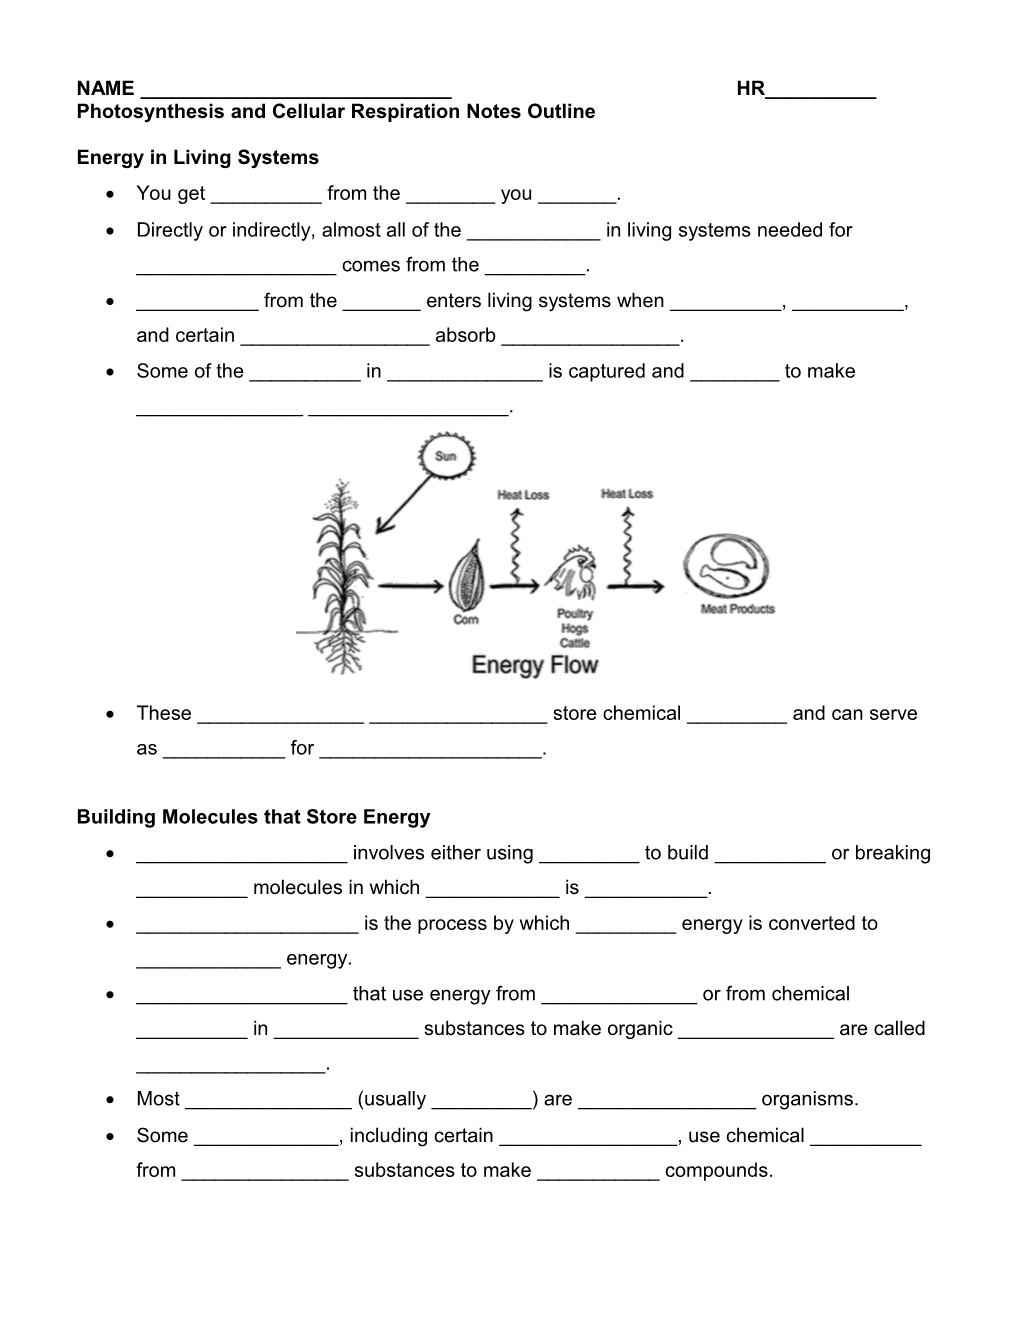 Photosynthesis and Cellular Respiration Notes Outline